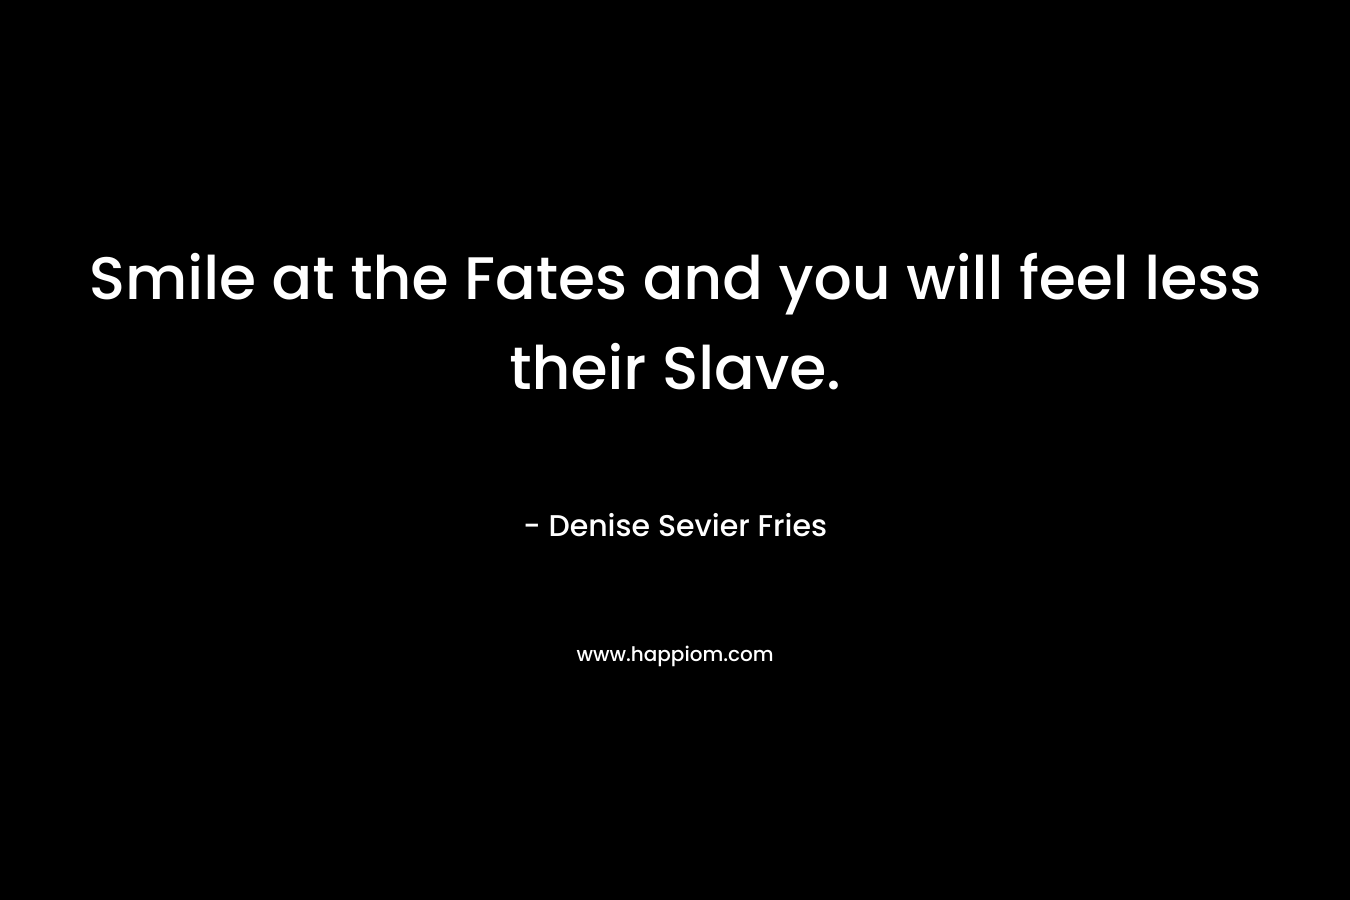 Smile at the Fates and you will feel less their Slave.